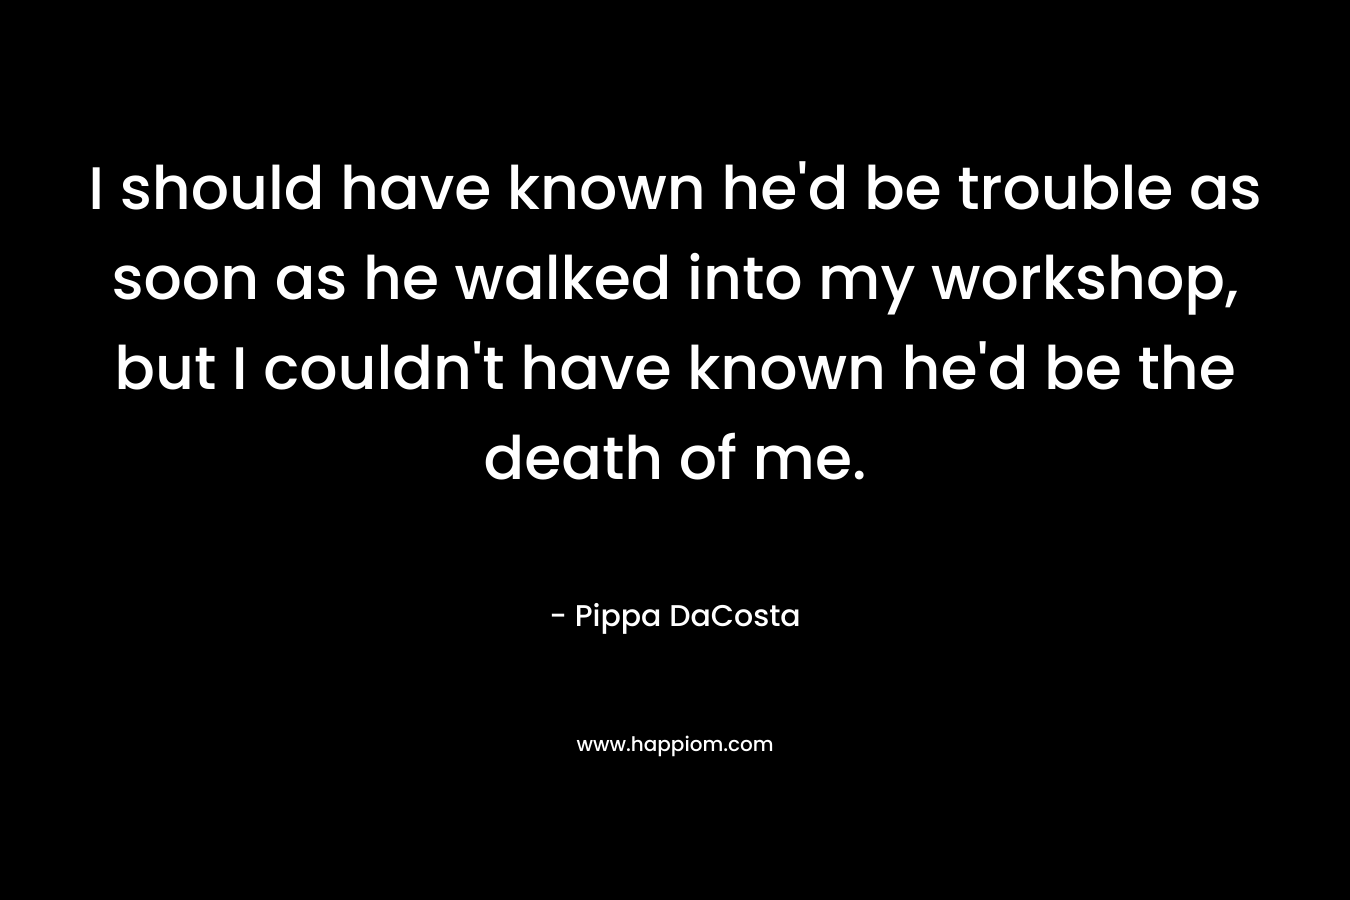 I should have known he’d be trouble as soon as he walked into my workshop, but I couldn’t have known he’d be the death of me. – Pippa DaCosta